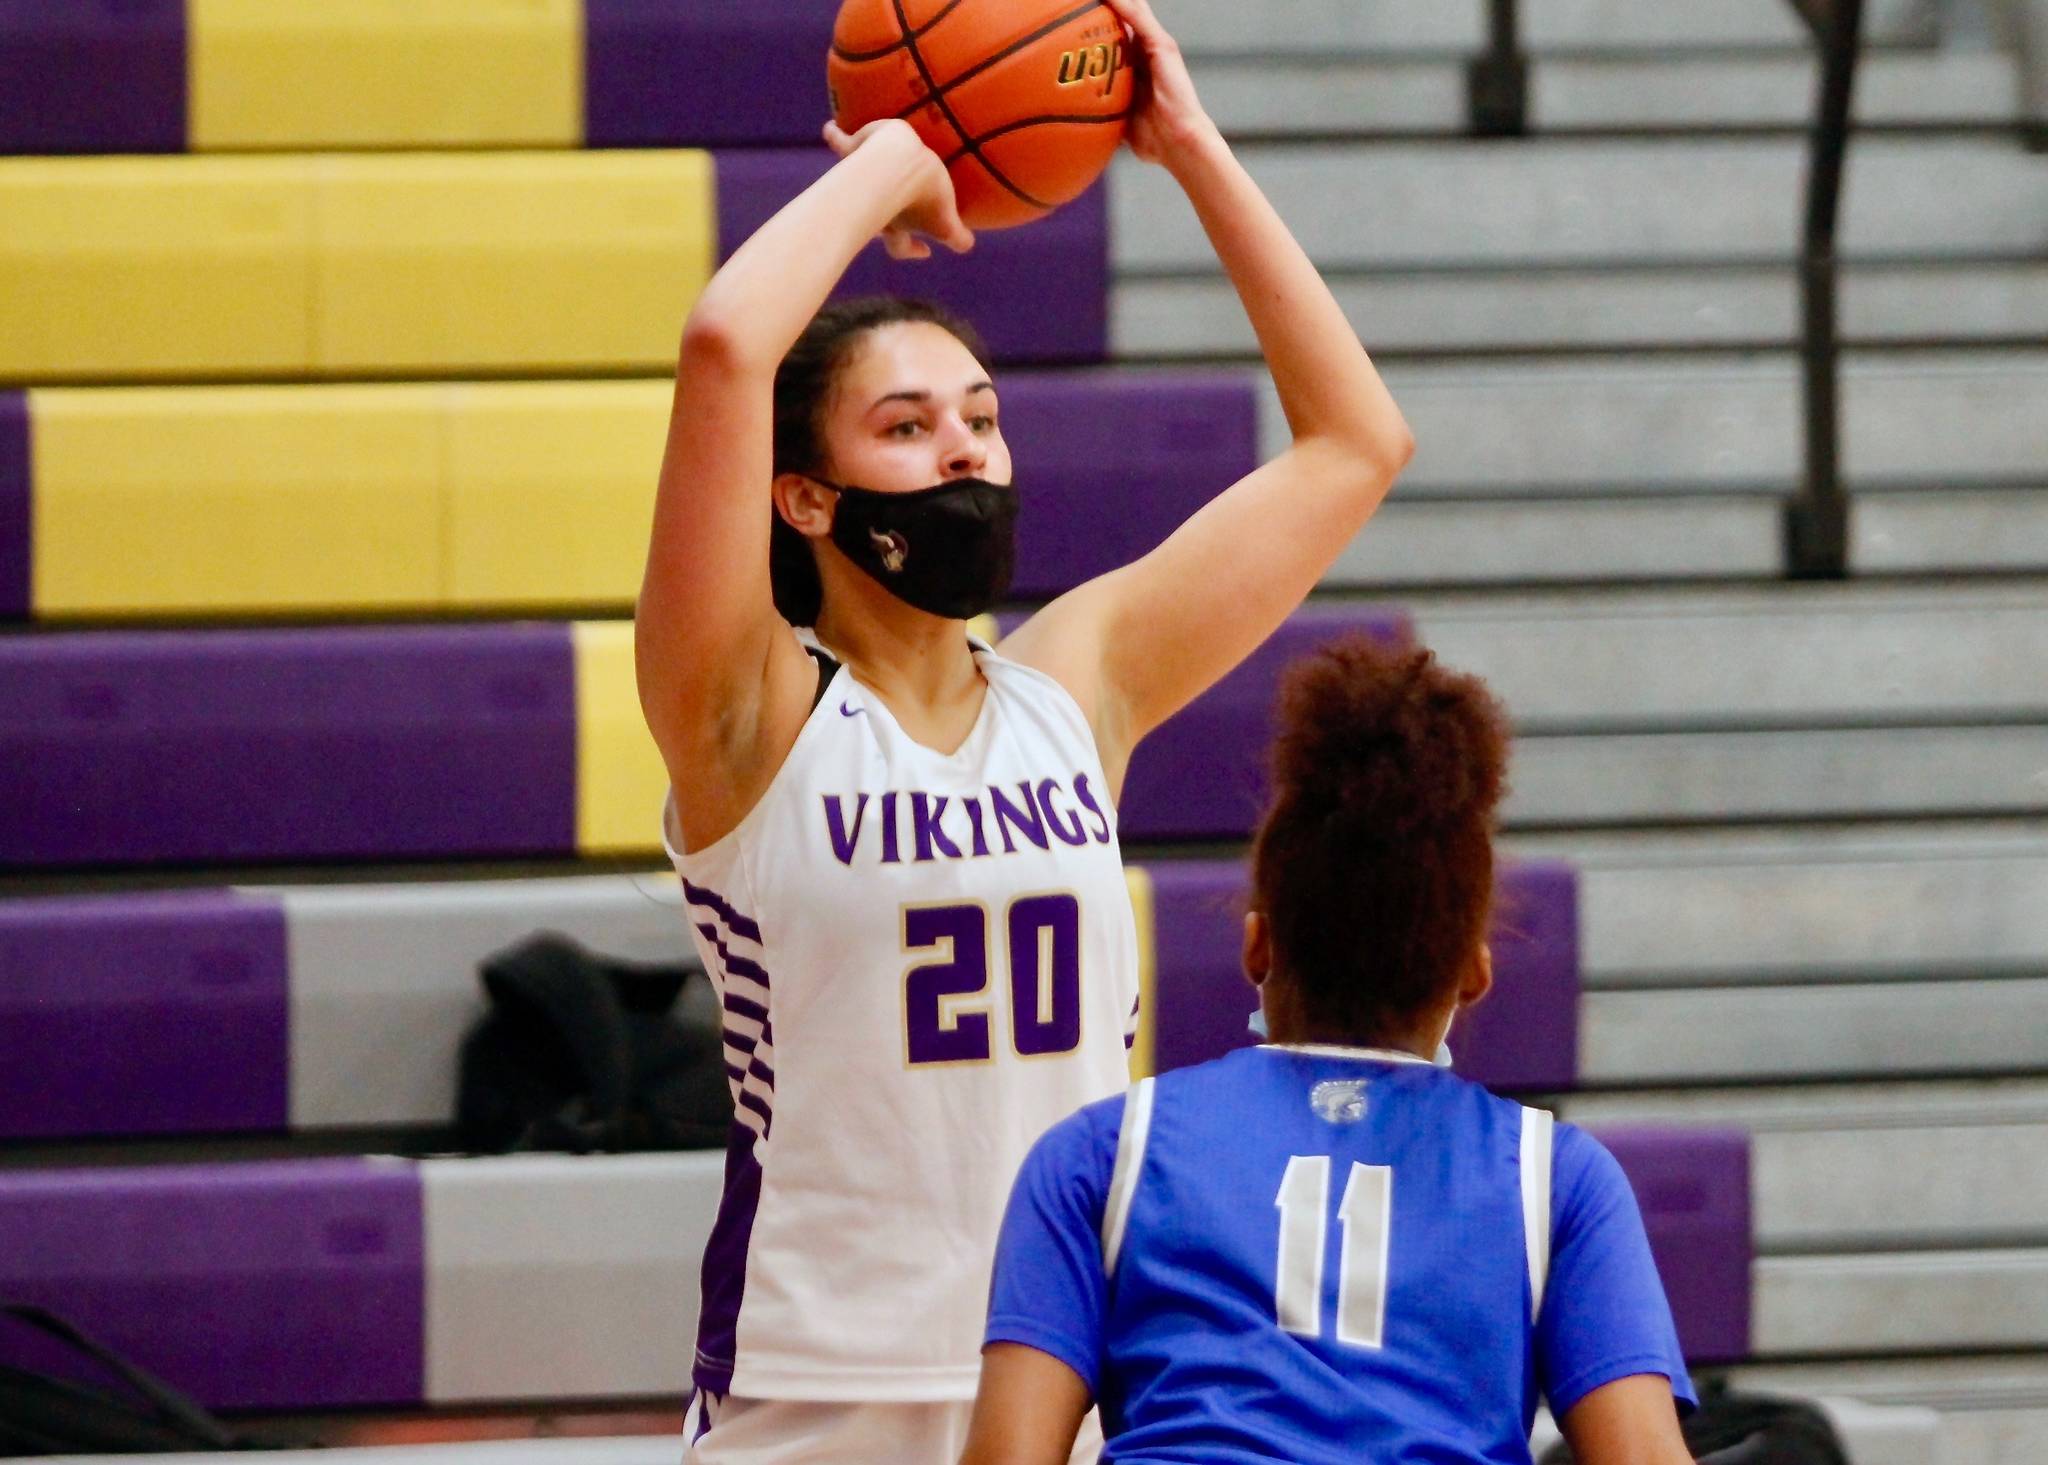 Mia McNair led the Vikings with 17 points in the girls’ Saturday win over Olympic. (Mark Krulish/Kitsap News Group)